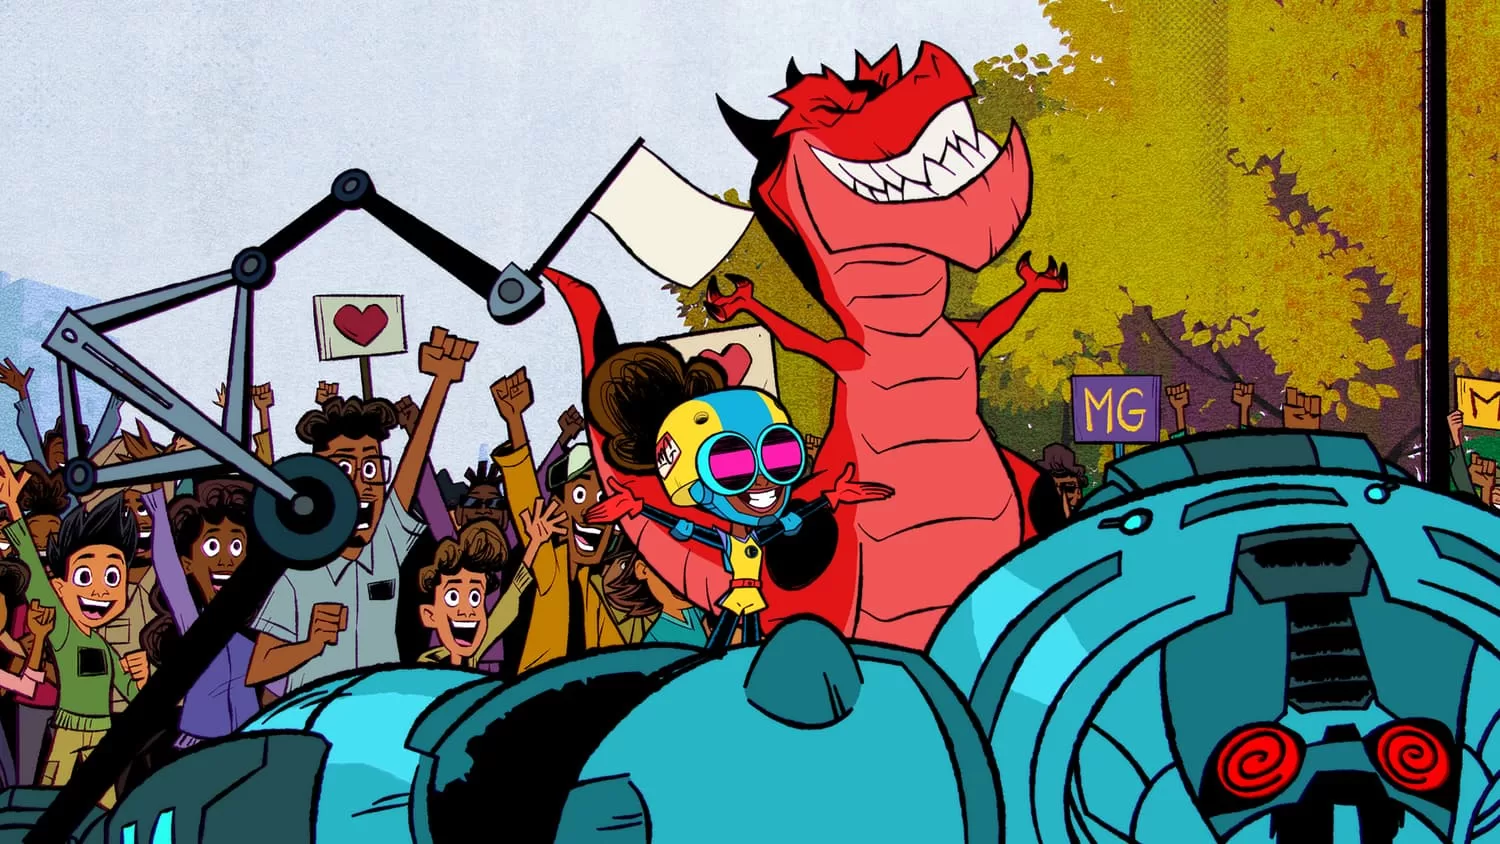 Moon Girl and Devil Dinosaur celebrate victory against a robot amongst a crowd of cheering fans. All in animation.